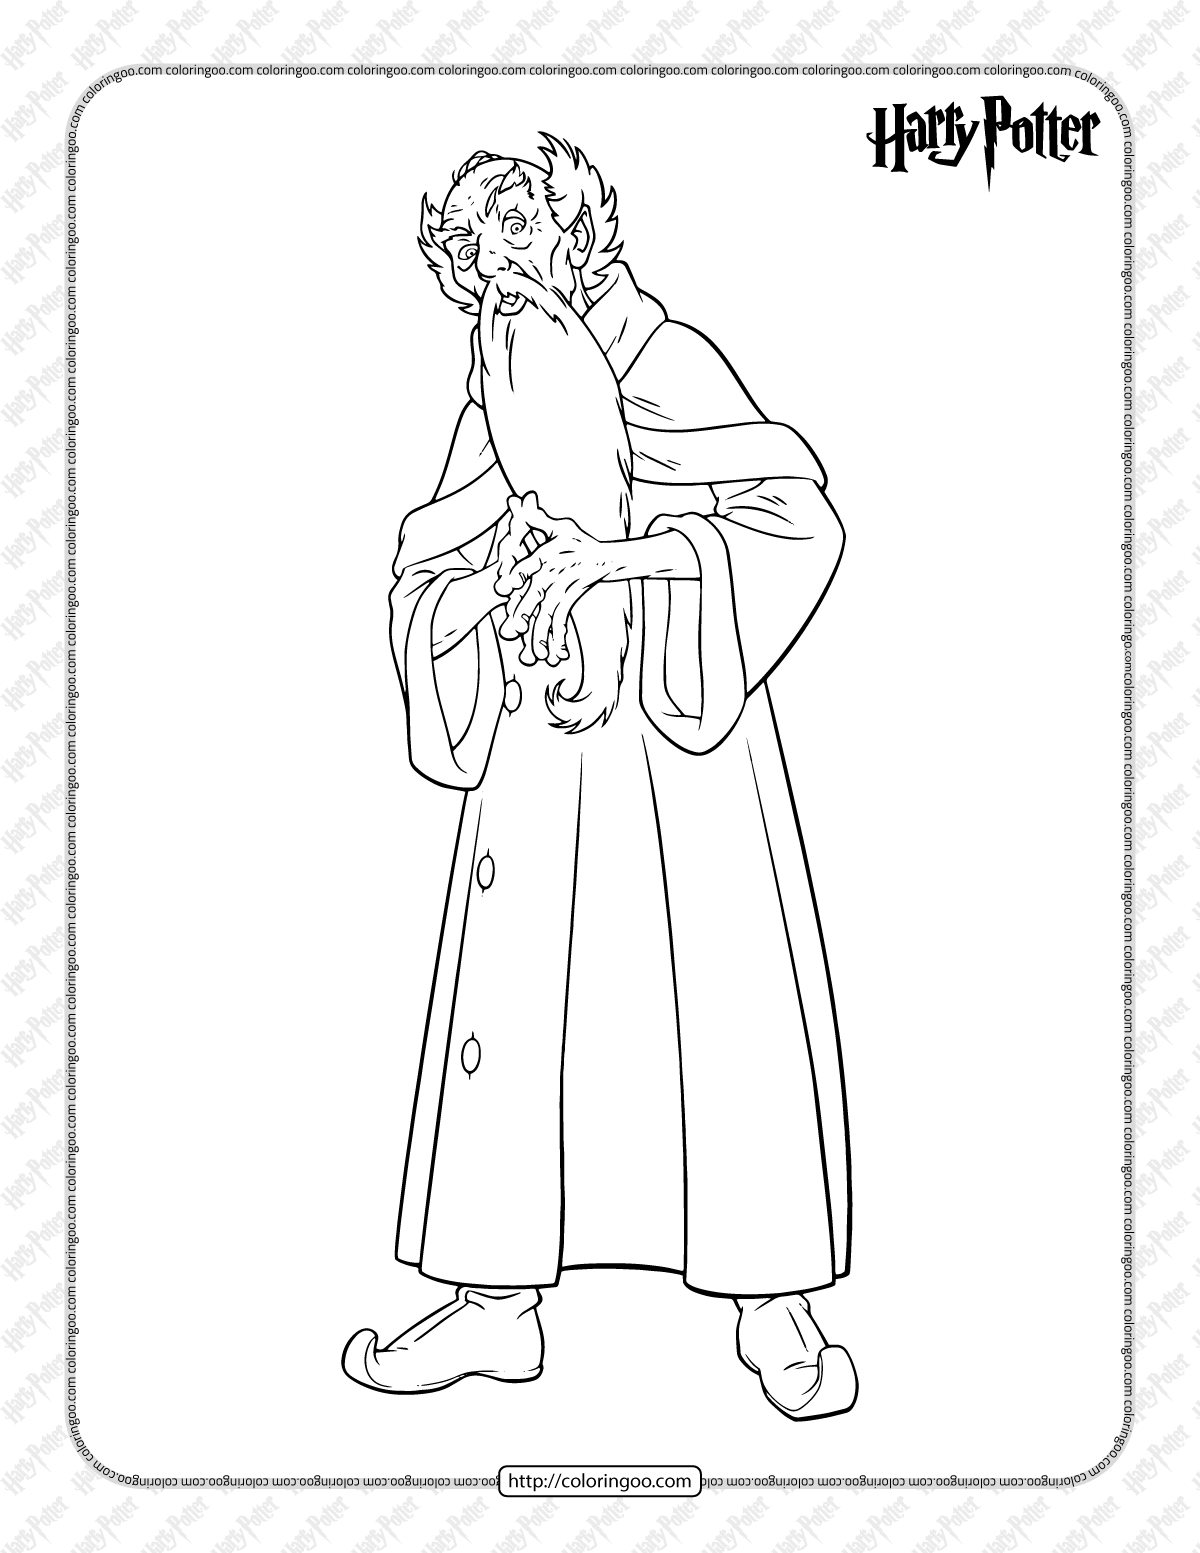 printable harry potter wizard coloring page